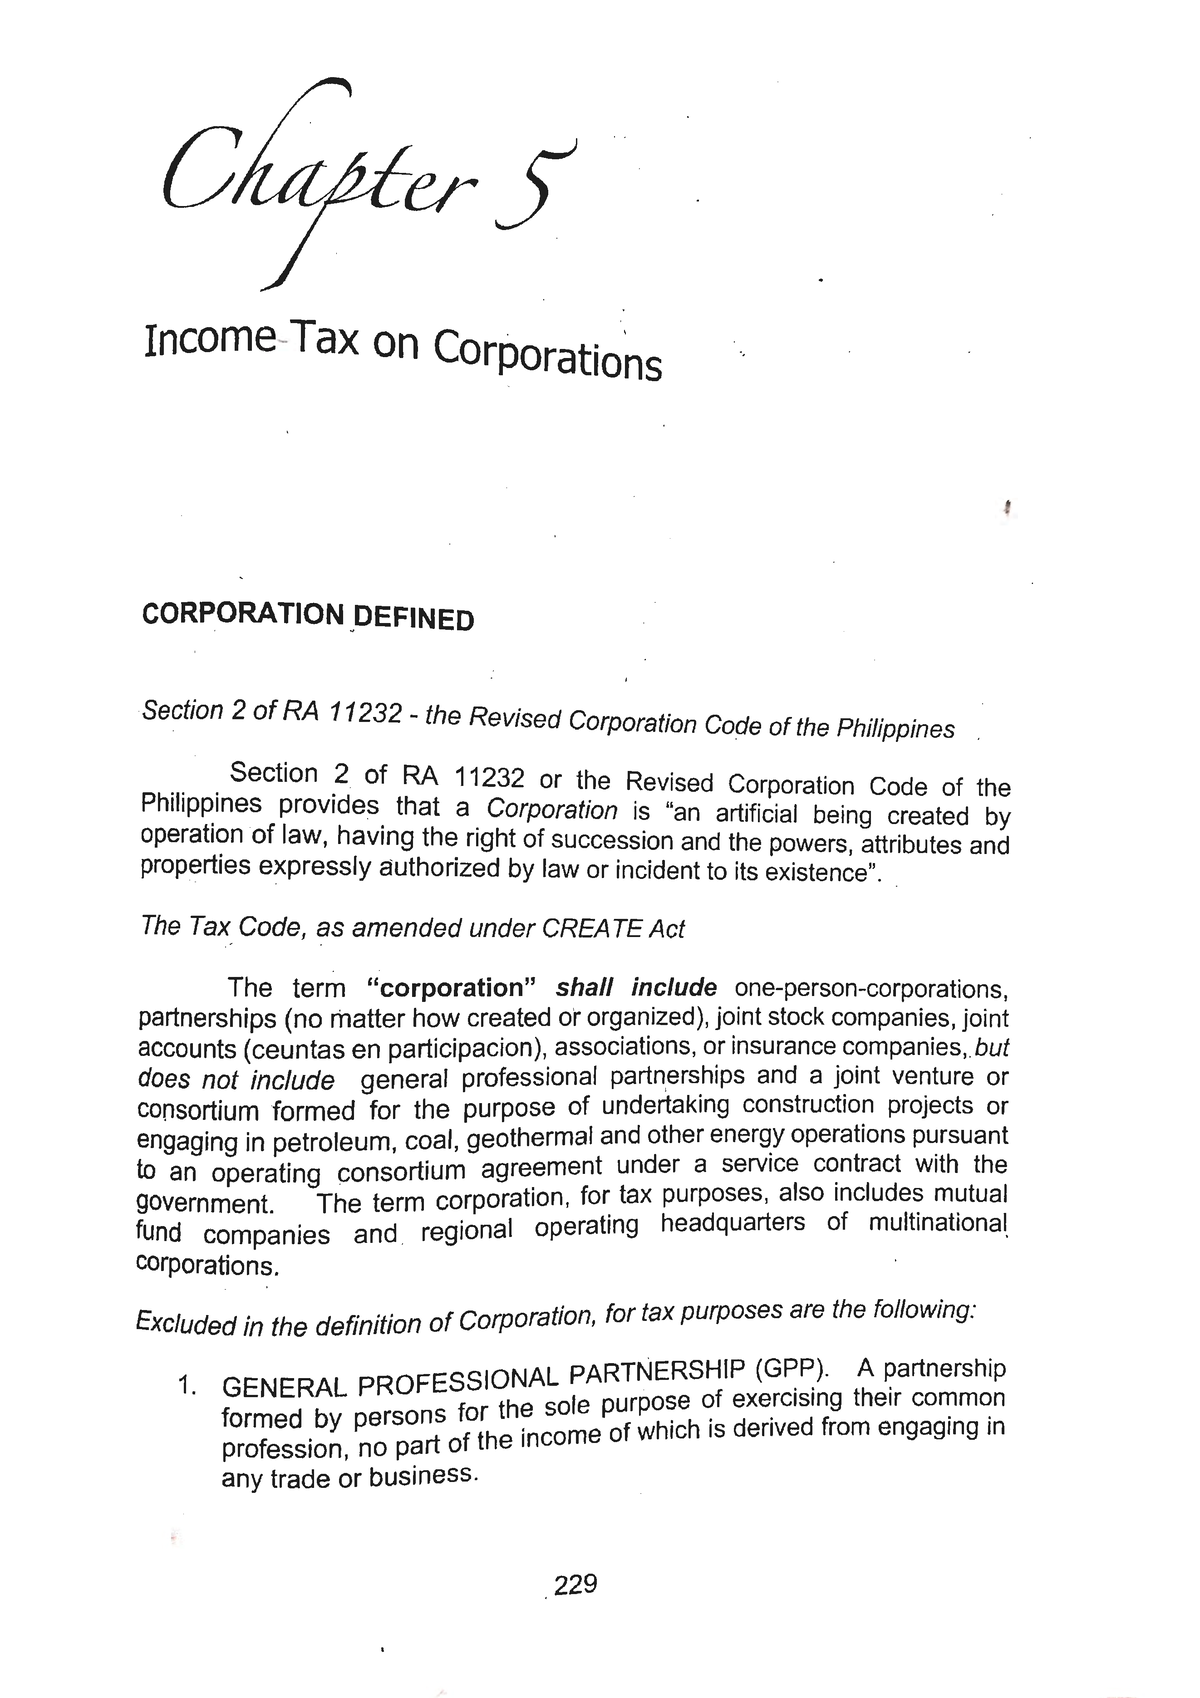 chapter-05-income-tax-on-corporations-c-income-tax-on-corporatio-s